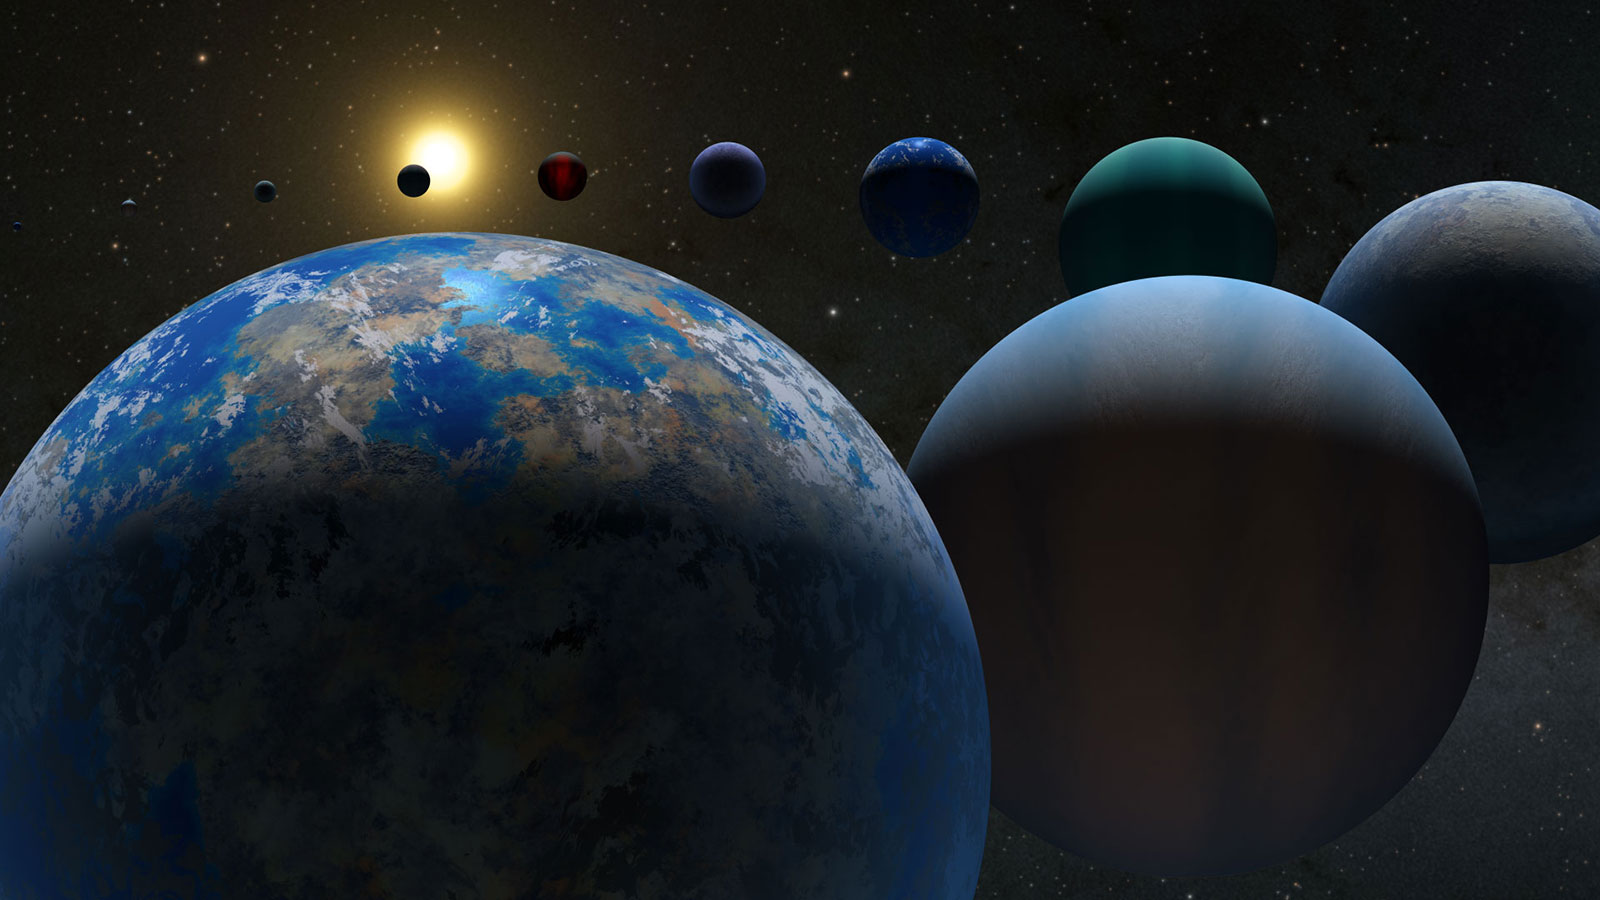 slide 4 - An artist's computer generated illustration shows many different exoplanet types in a sweeping, swirling line with a distant star in the background.